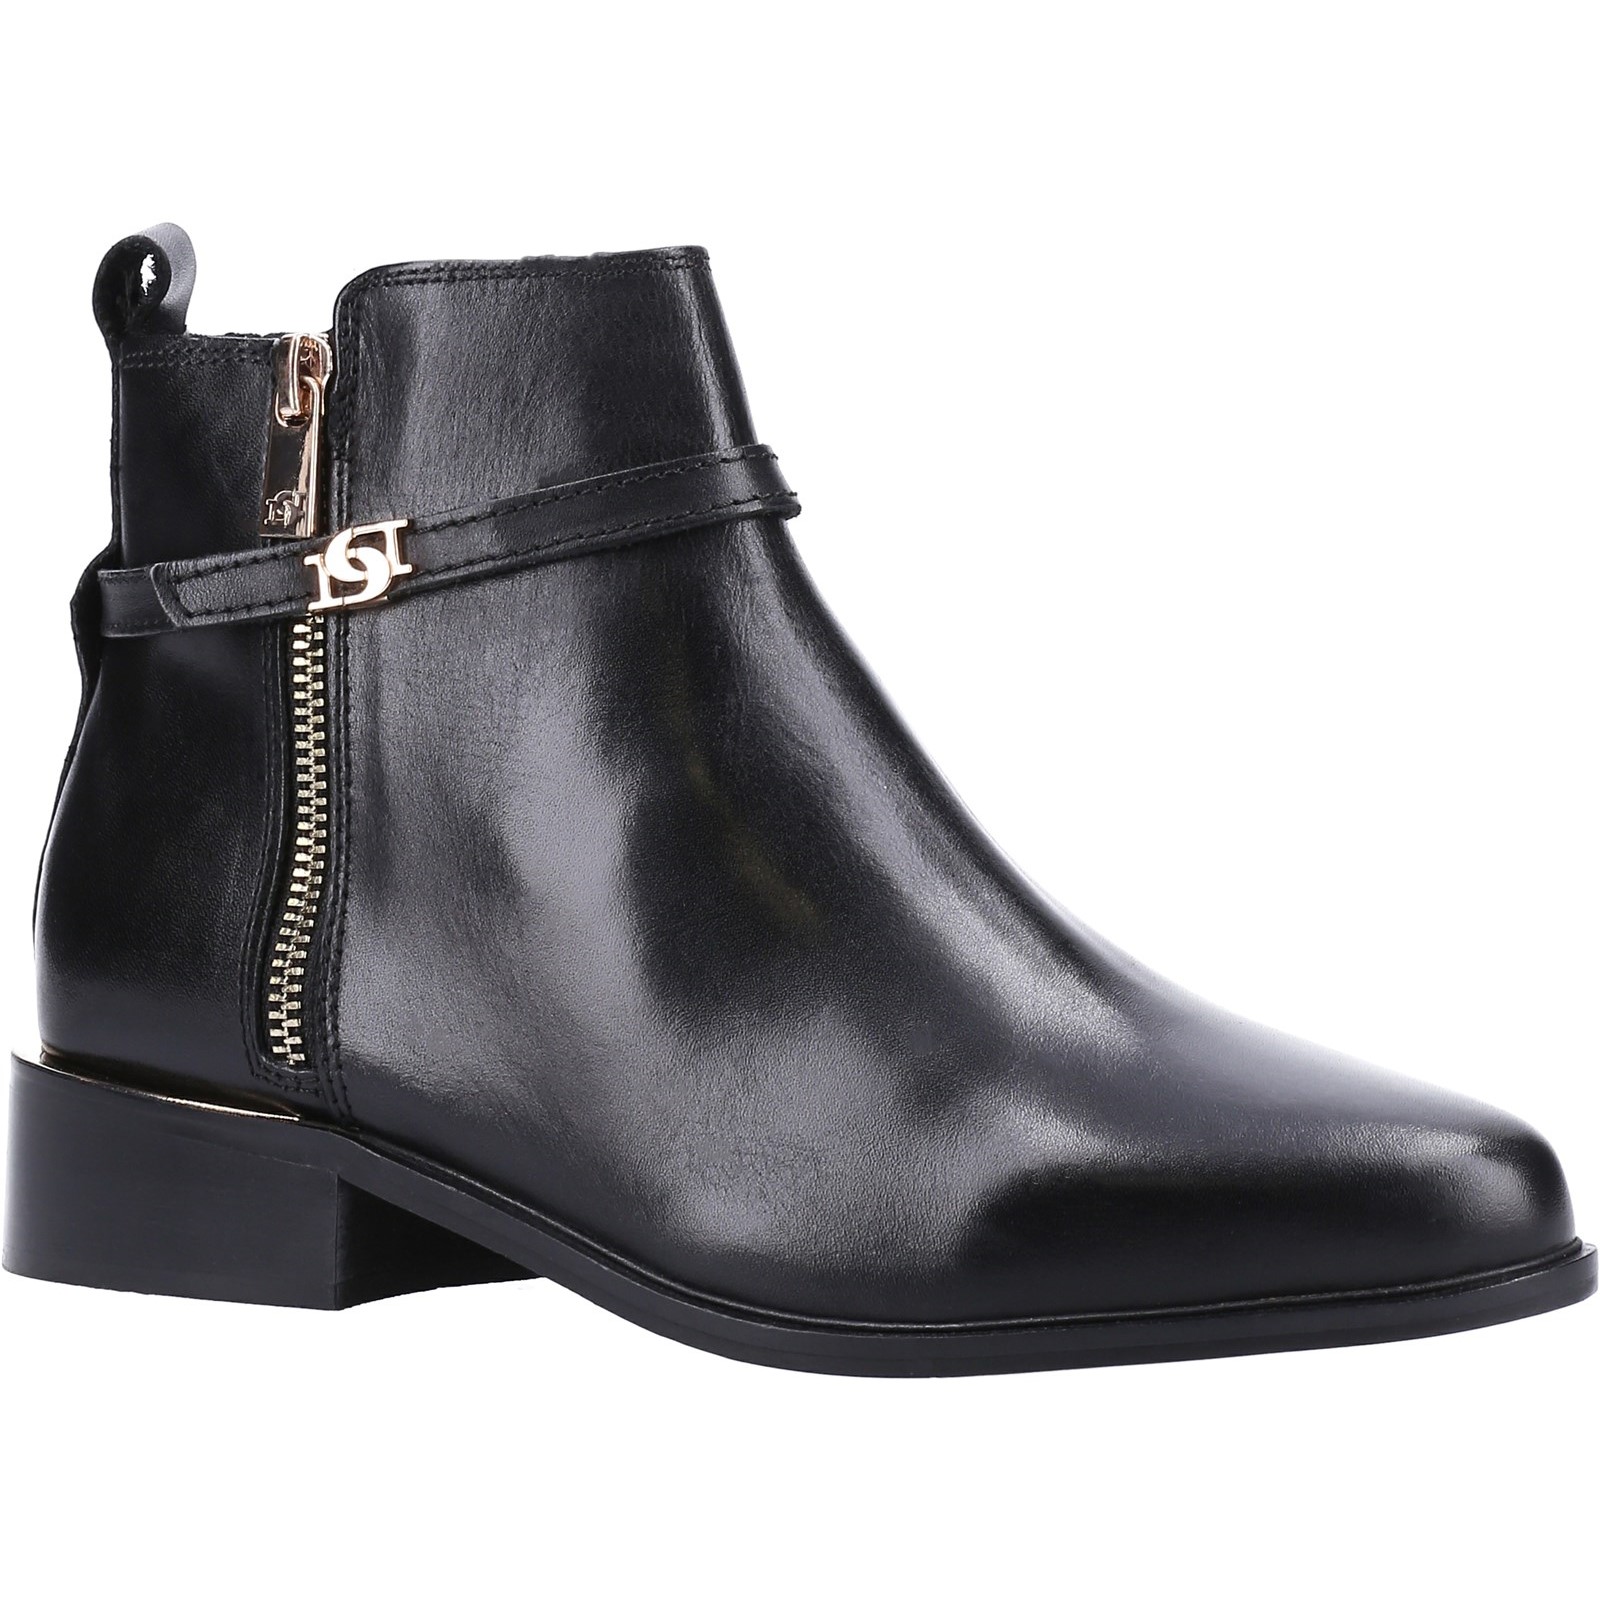 Pap Buckle Trim Ankle Boot